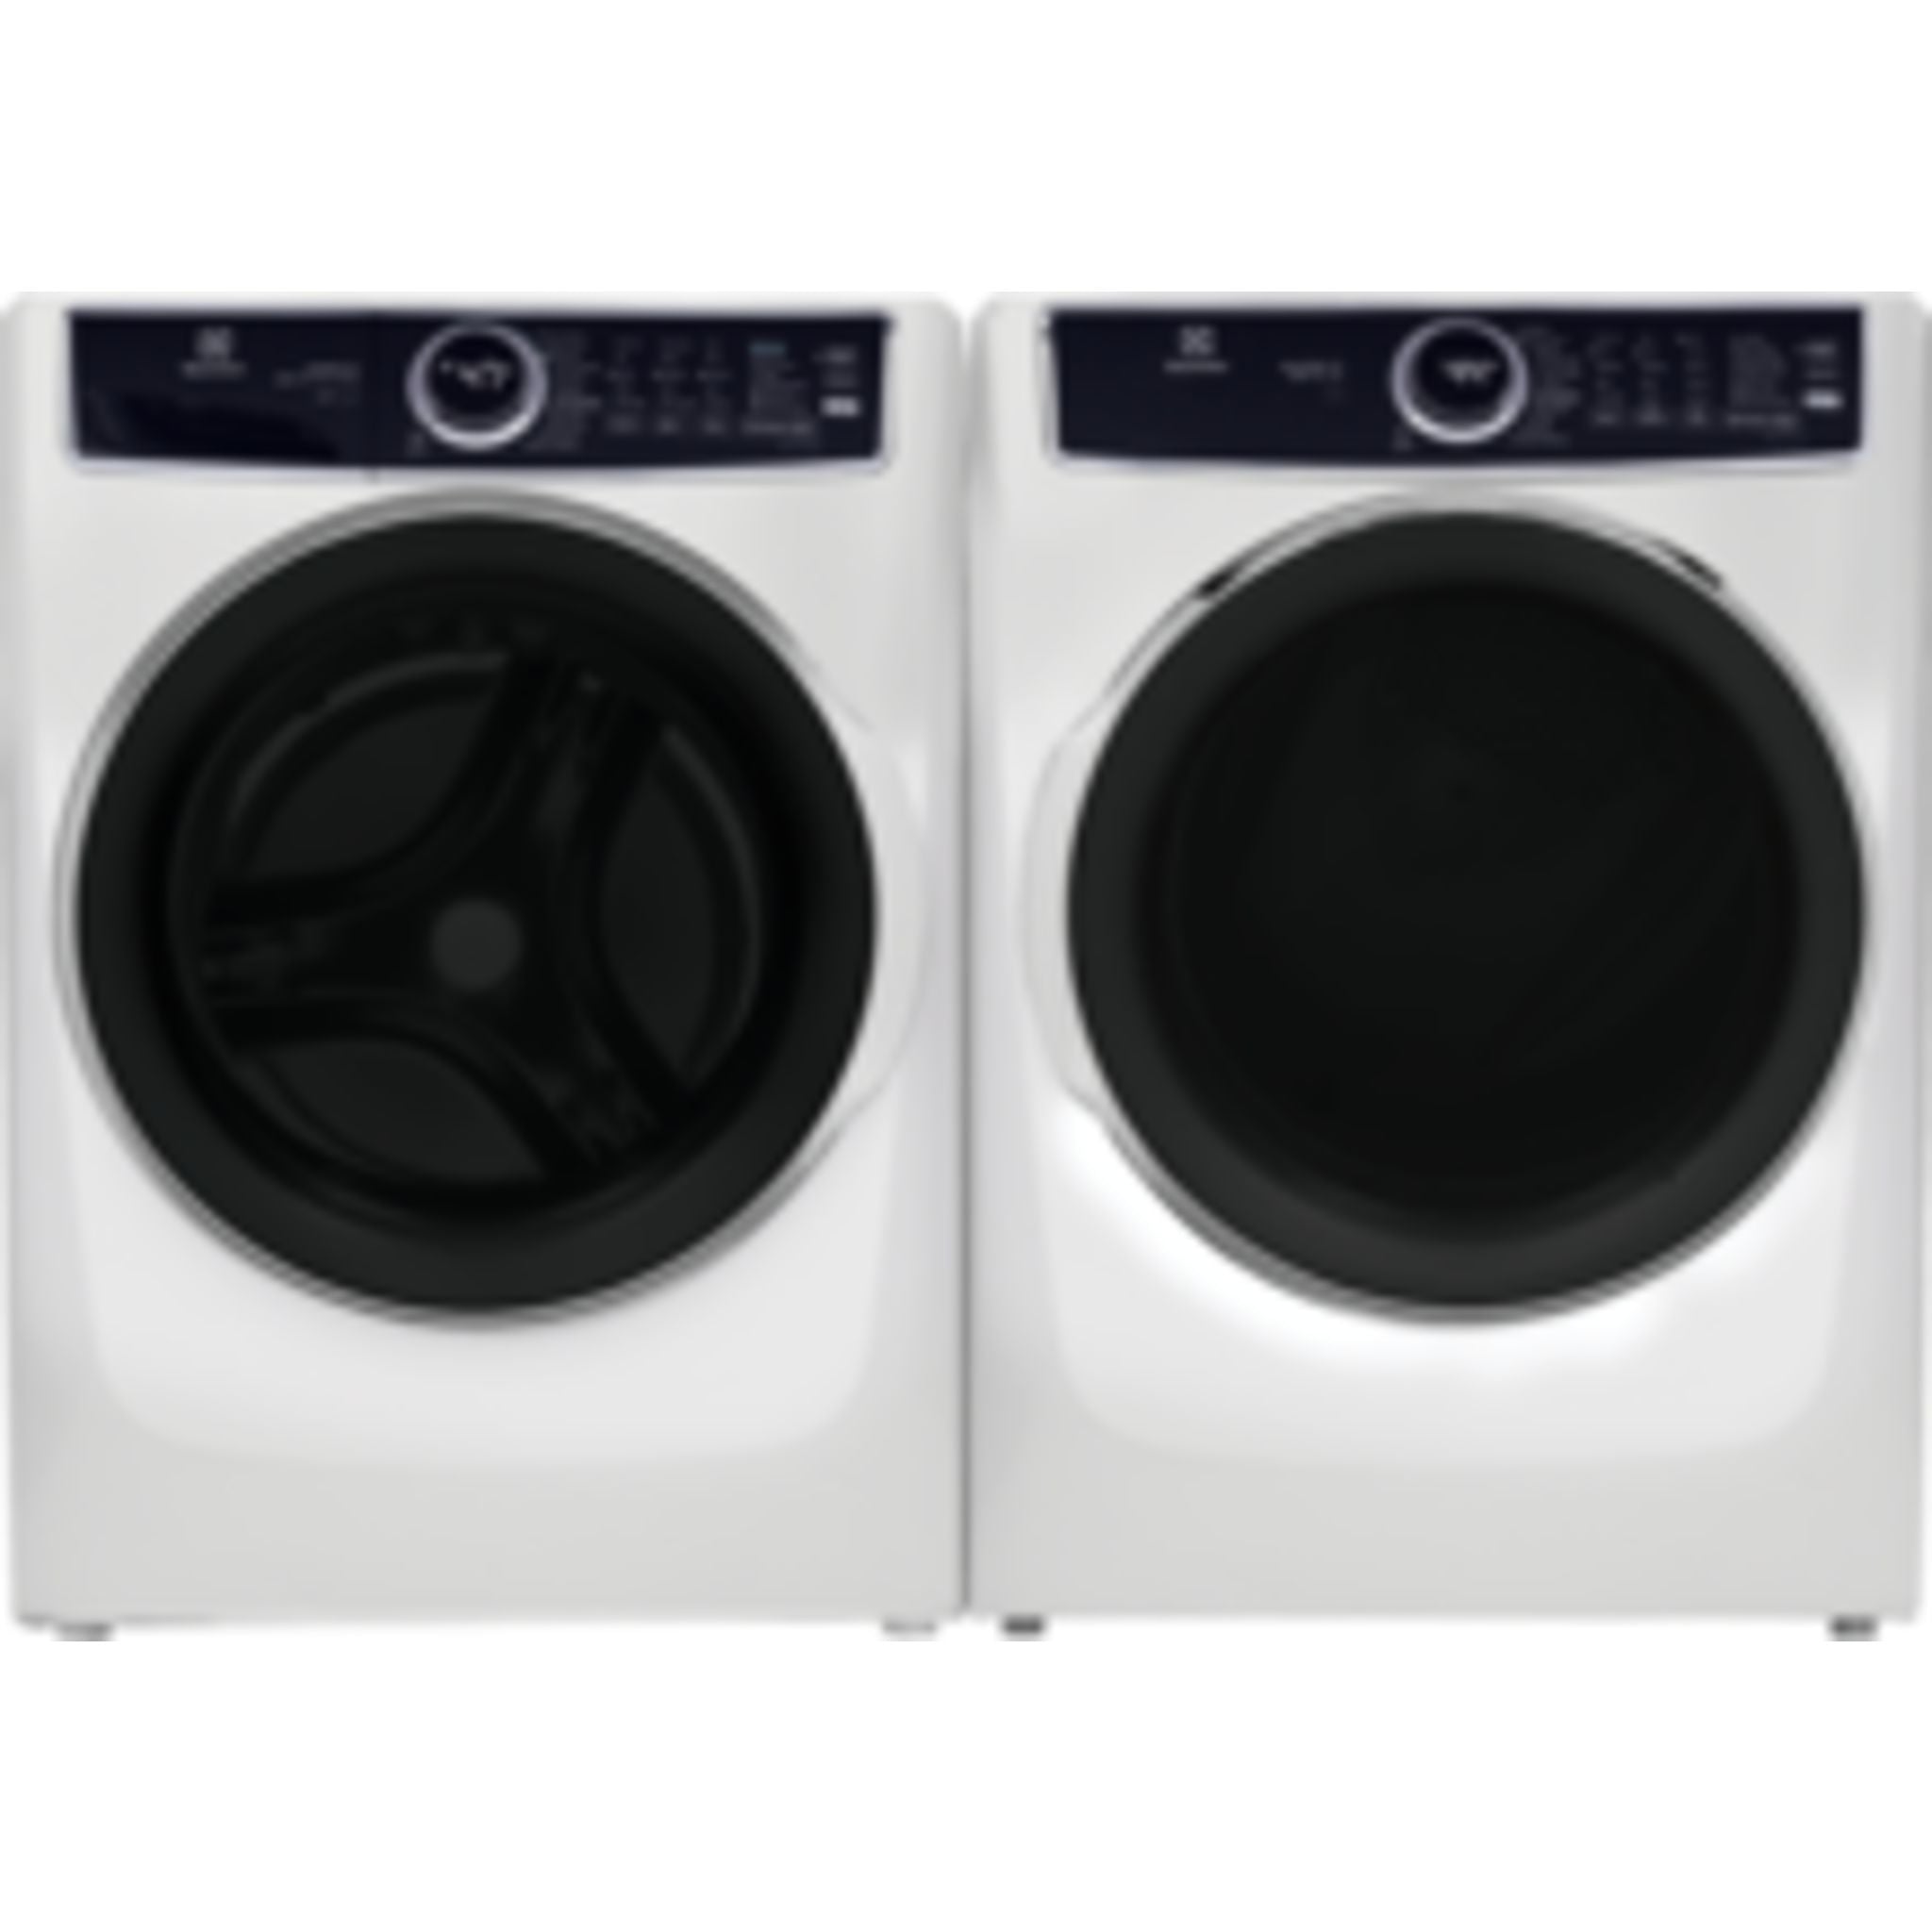 Electrolux Home Products, Electrolux Front Load Pair (1554078K) - White